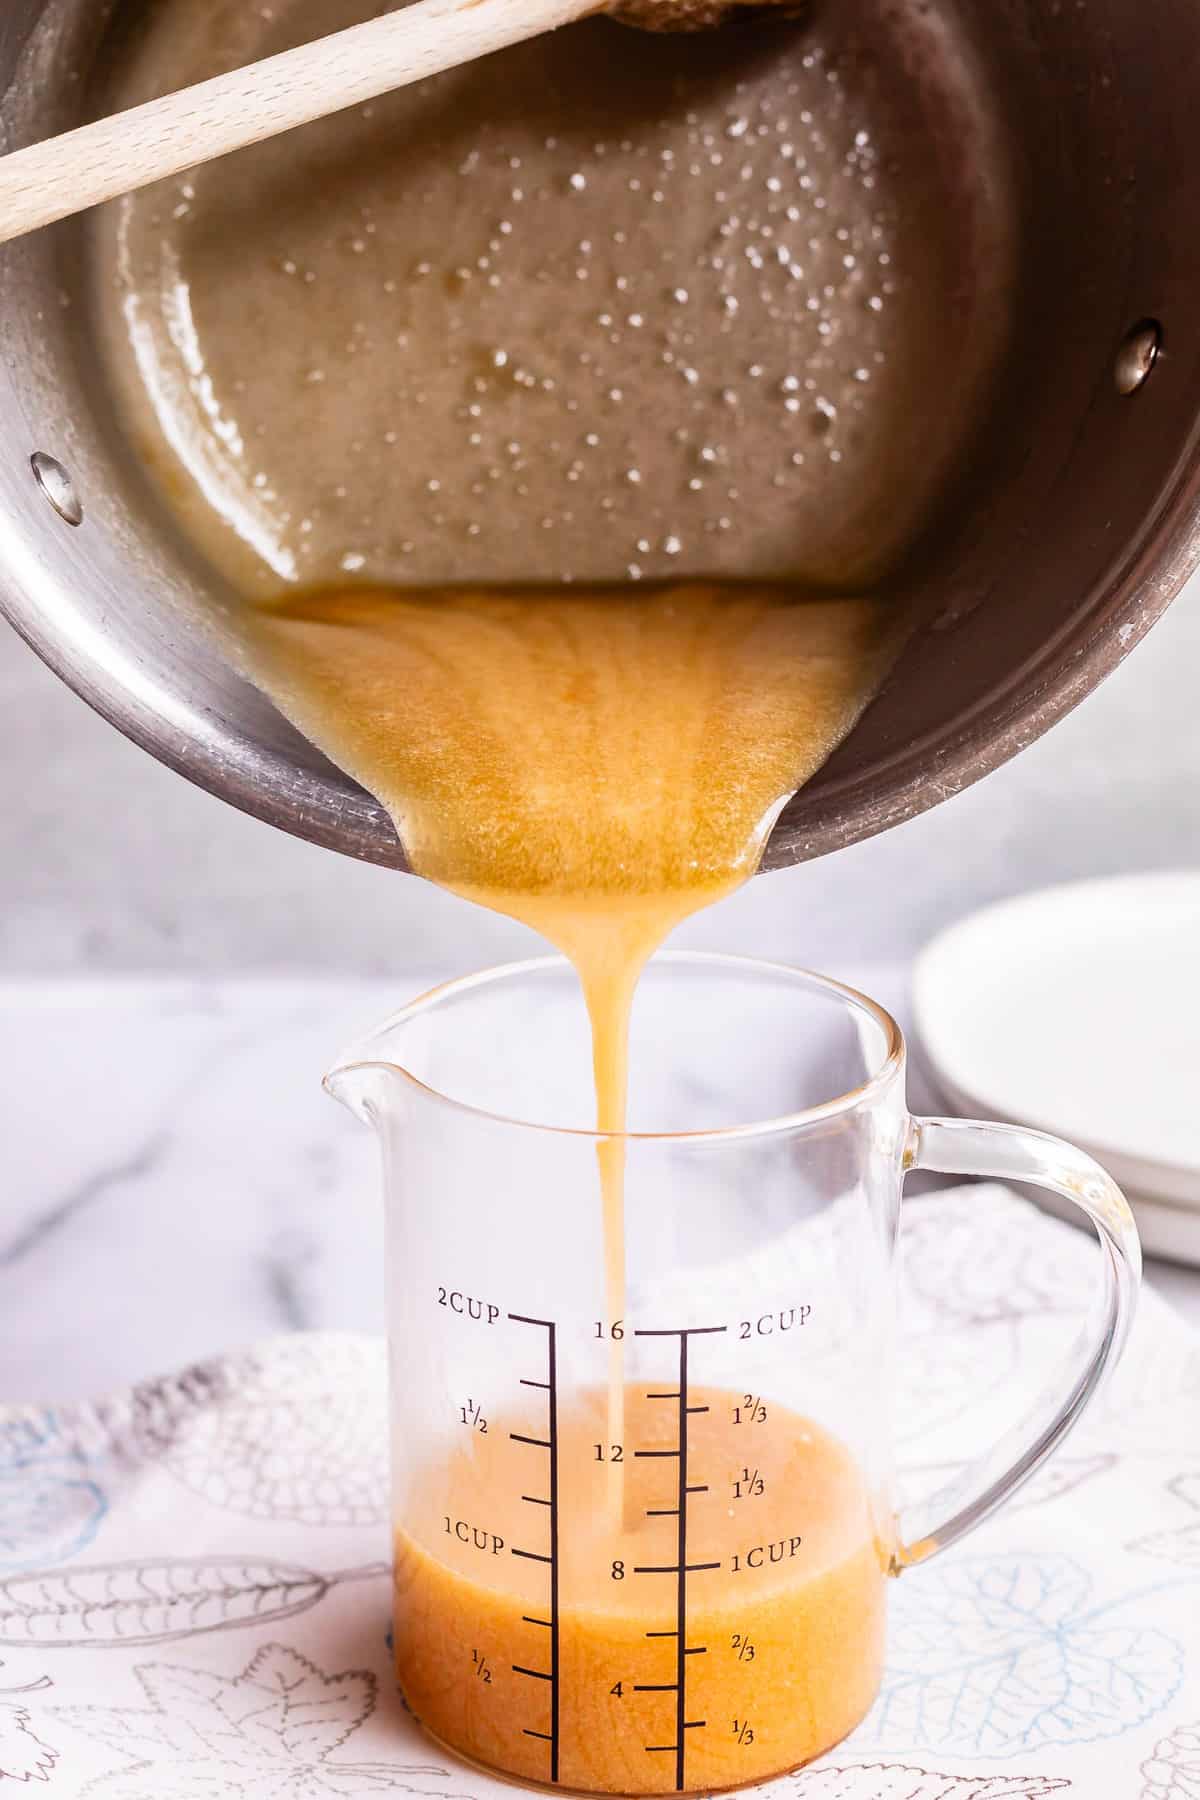 pouring syrup from a pot into a glass measuring cup on a white counter.